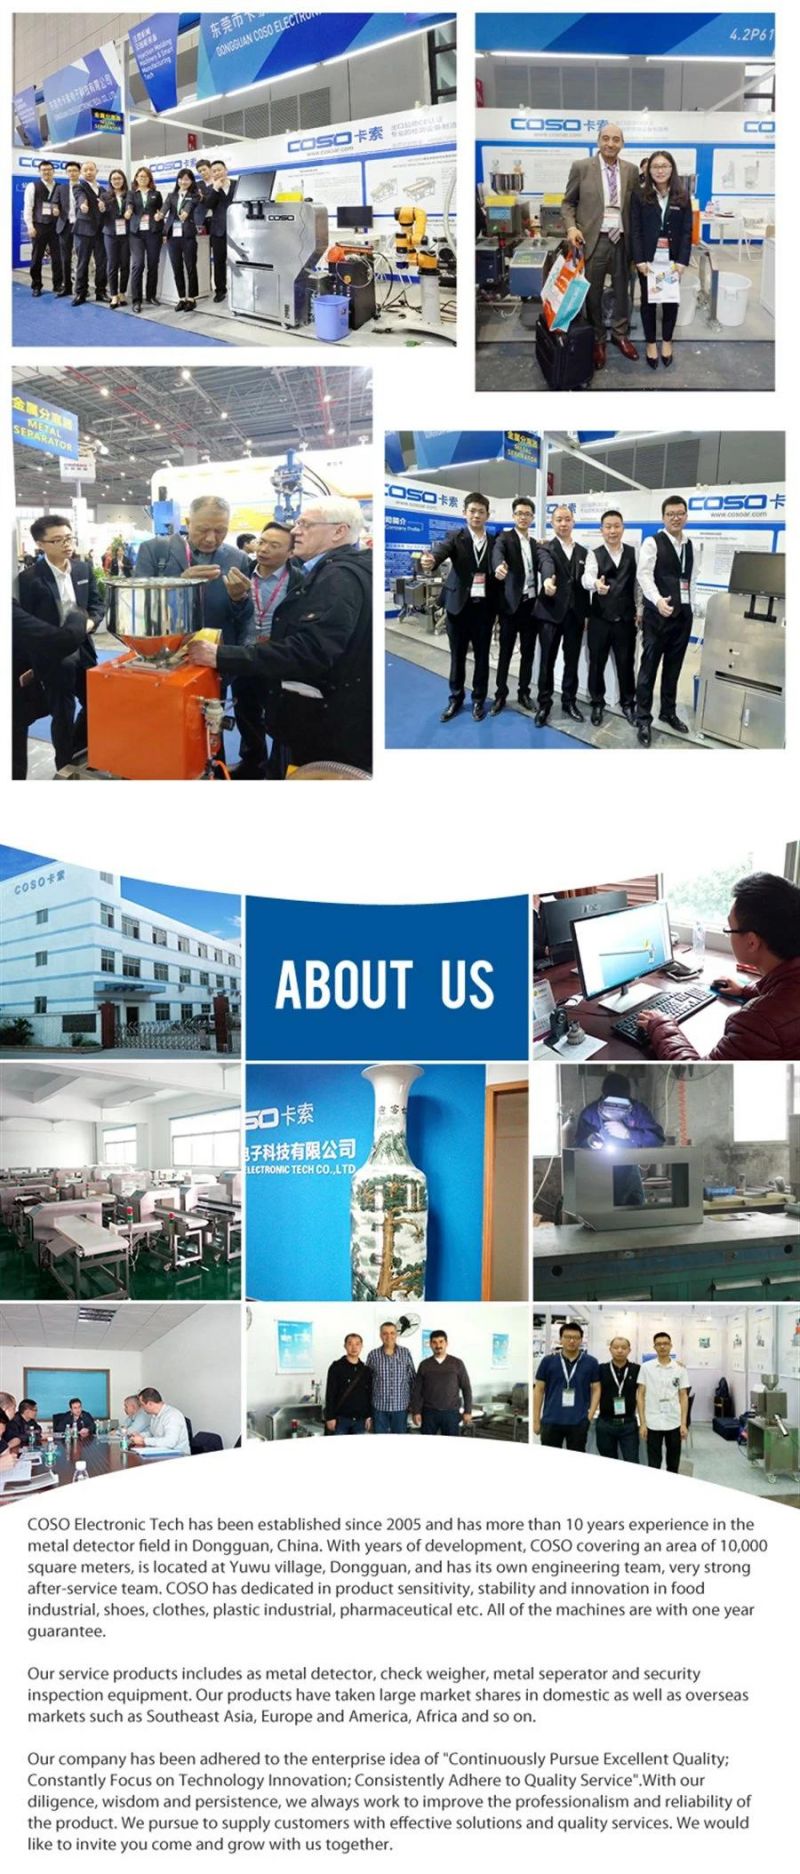 China Manufacturer Produce Automatic Check Weigher Weighing Scales / Conveyor Weight Inspection Machine